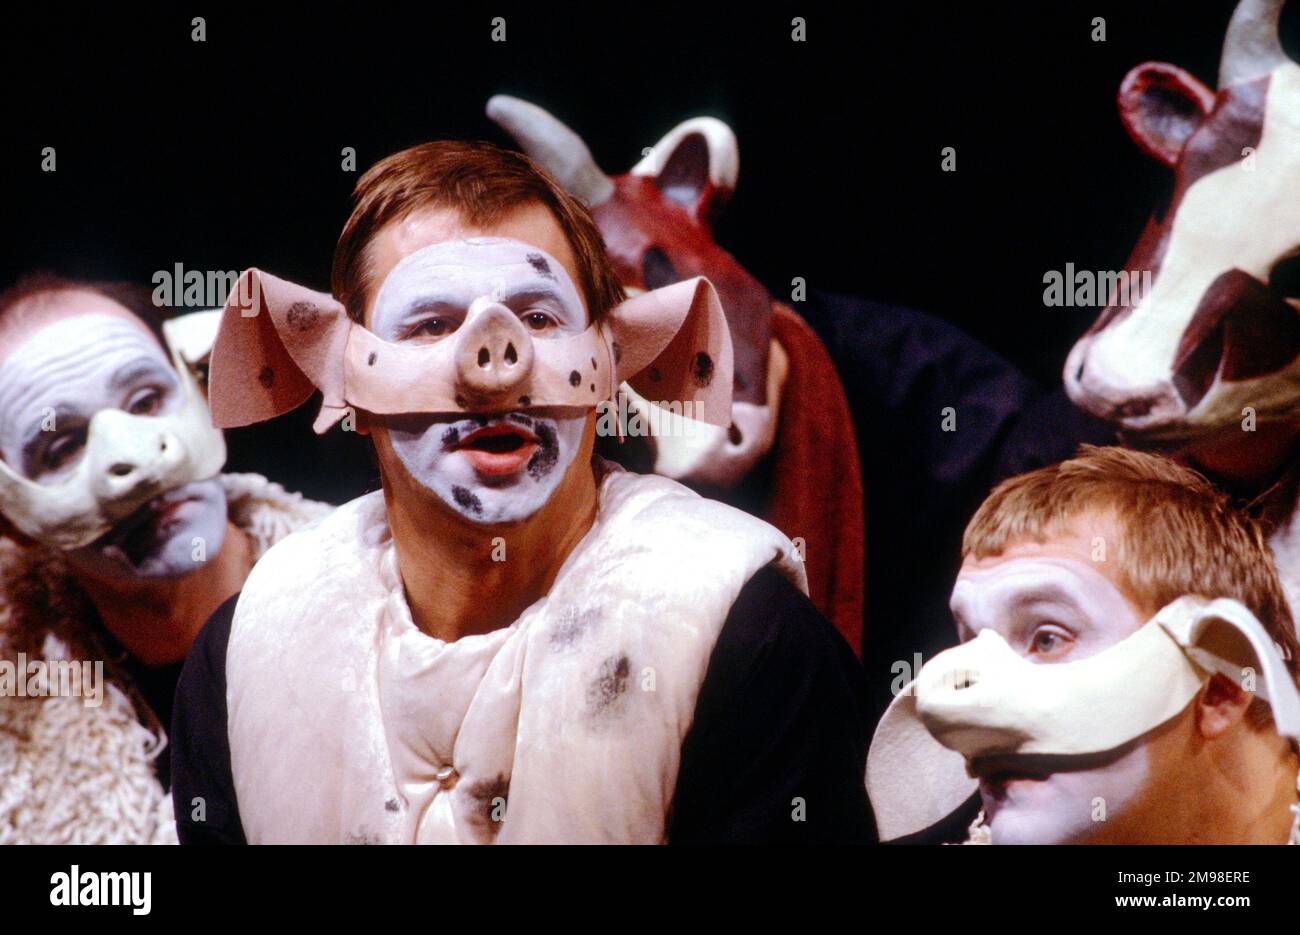 Barrie Rutter (Napoleon) in ANIMAL FARM by George Orwell at the Olivier Theatre, National Theatre (NT), London SE1  27/09/1984  adapted & directed by Peter Hall  design: Jennifer Carey  lighting: John Bury  movement: Stuart Hopps Stock Photo